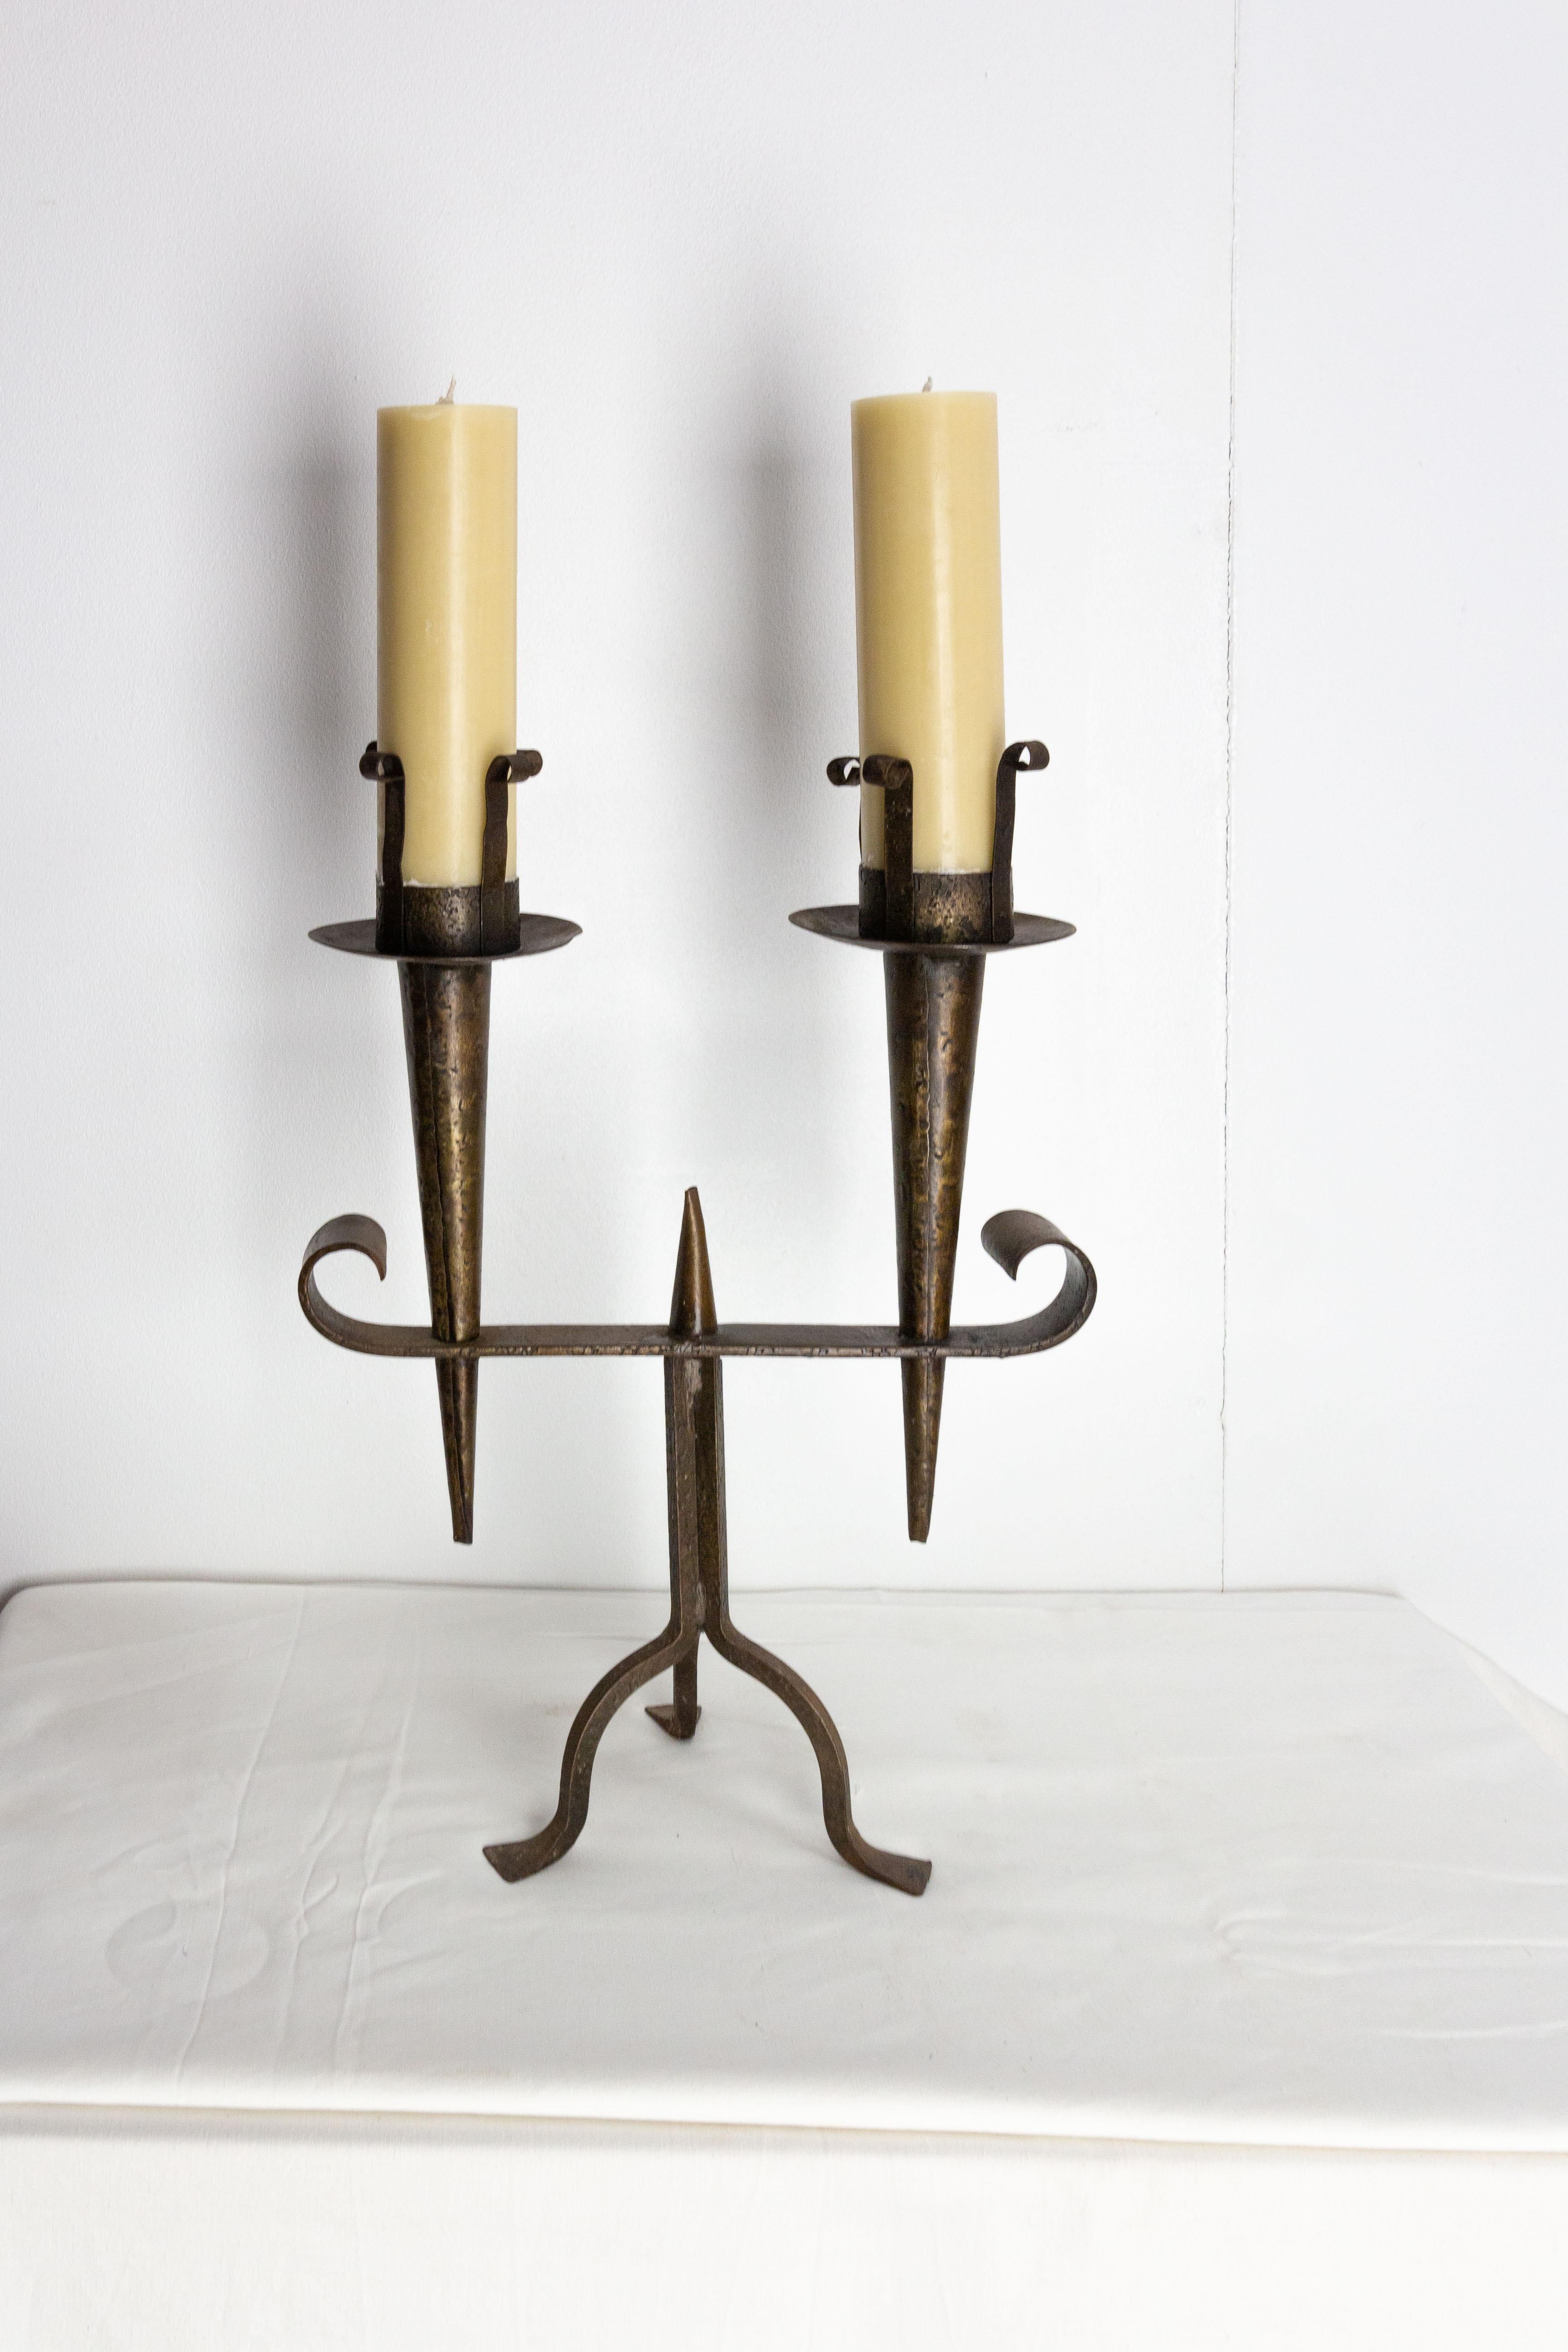 French wought iron double candle holder.
The candles will be delivered with the candleholder
Good condition.

Shipping:
16 x 33.5 x 48 cm 2.7 kg.